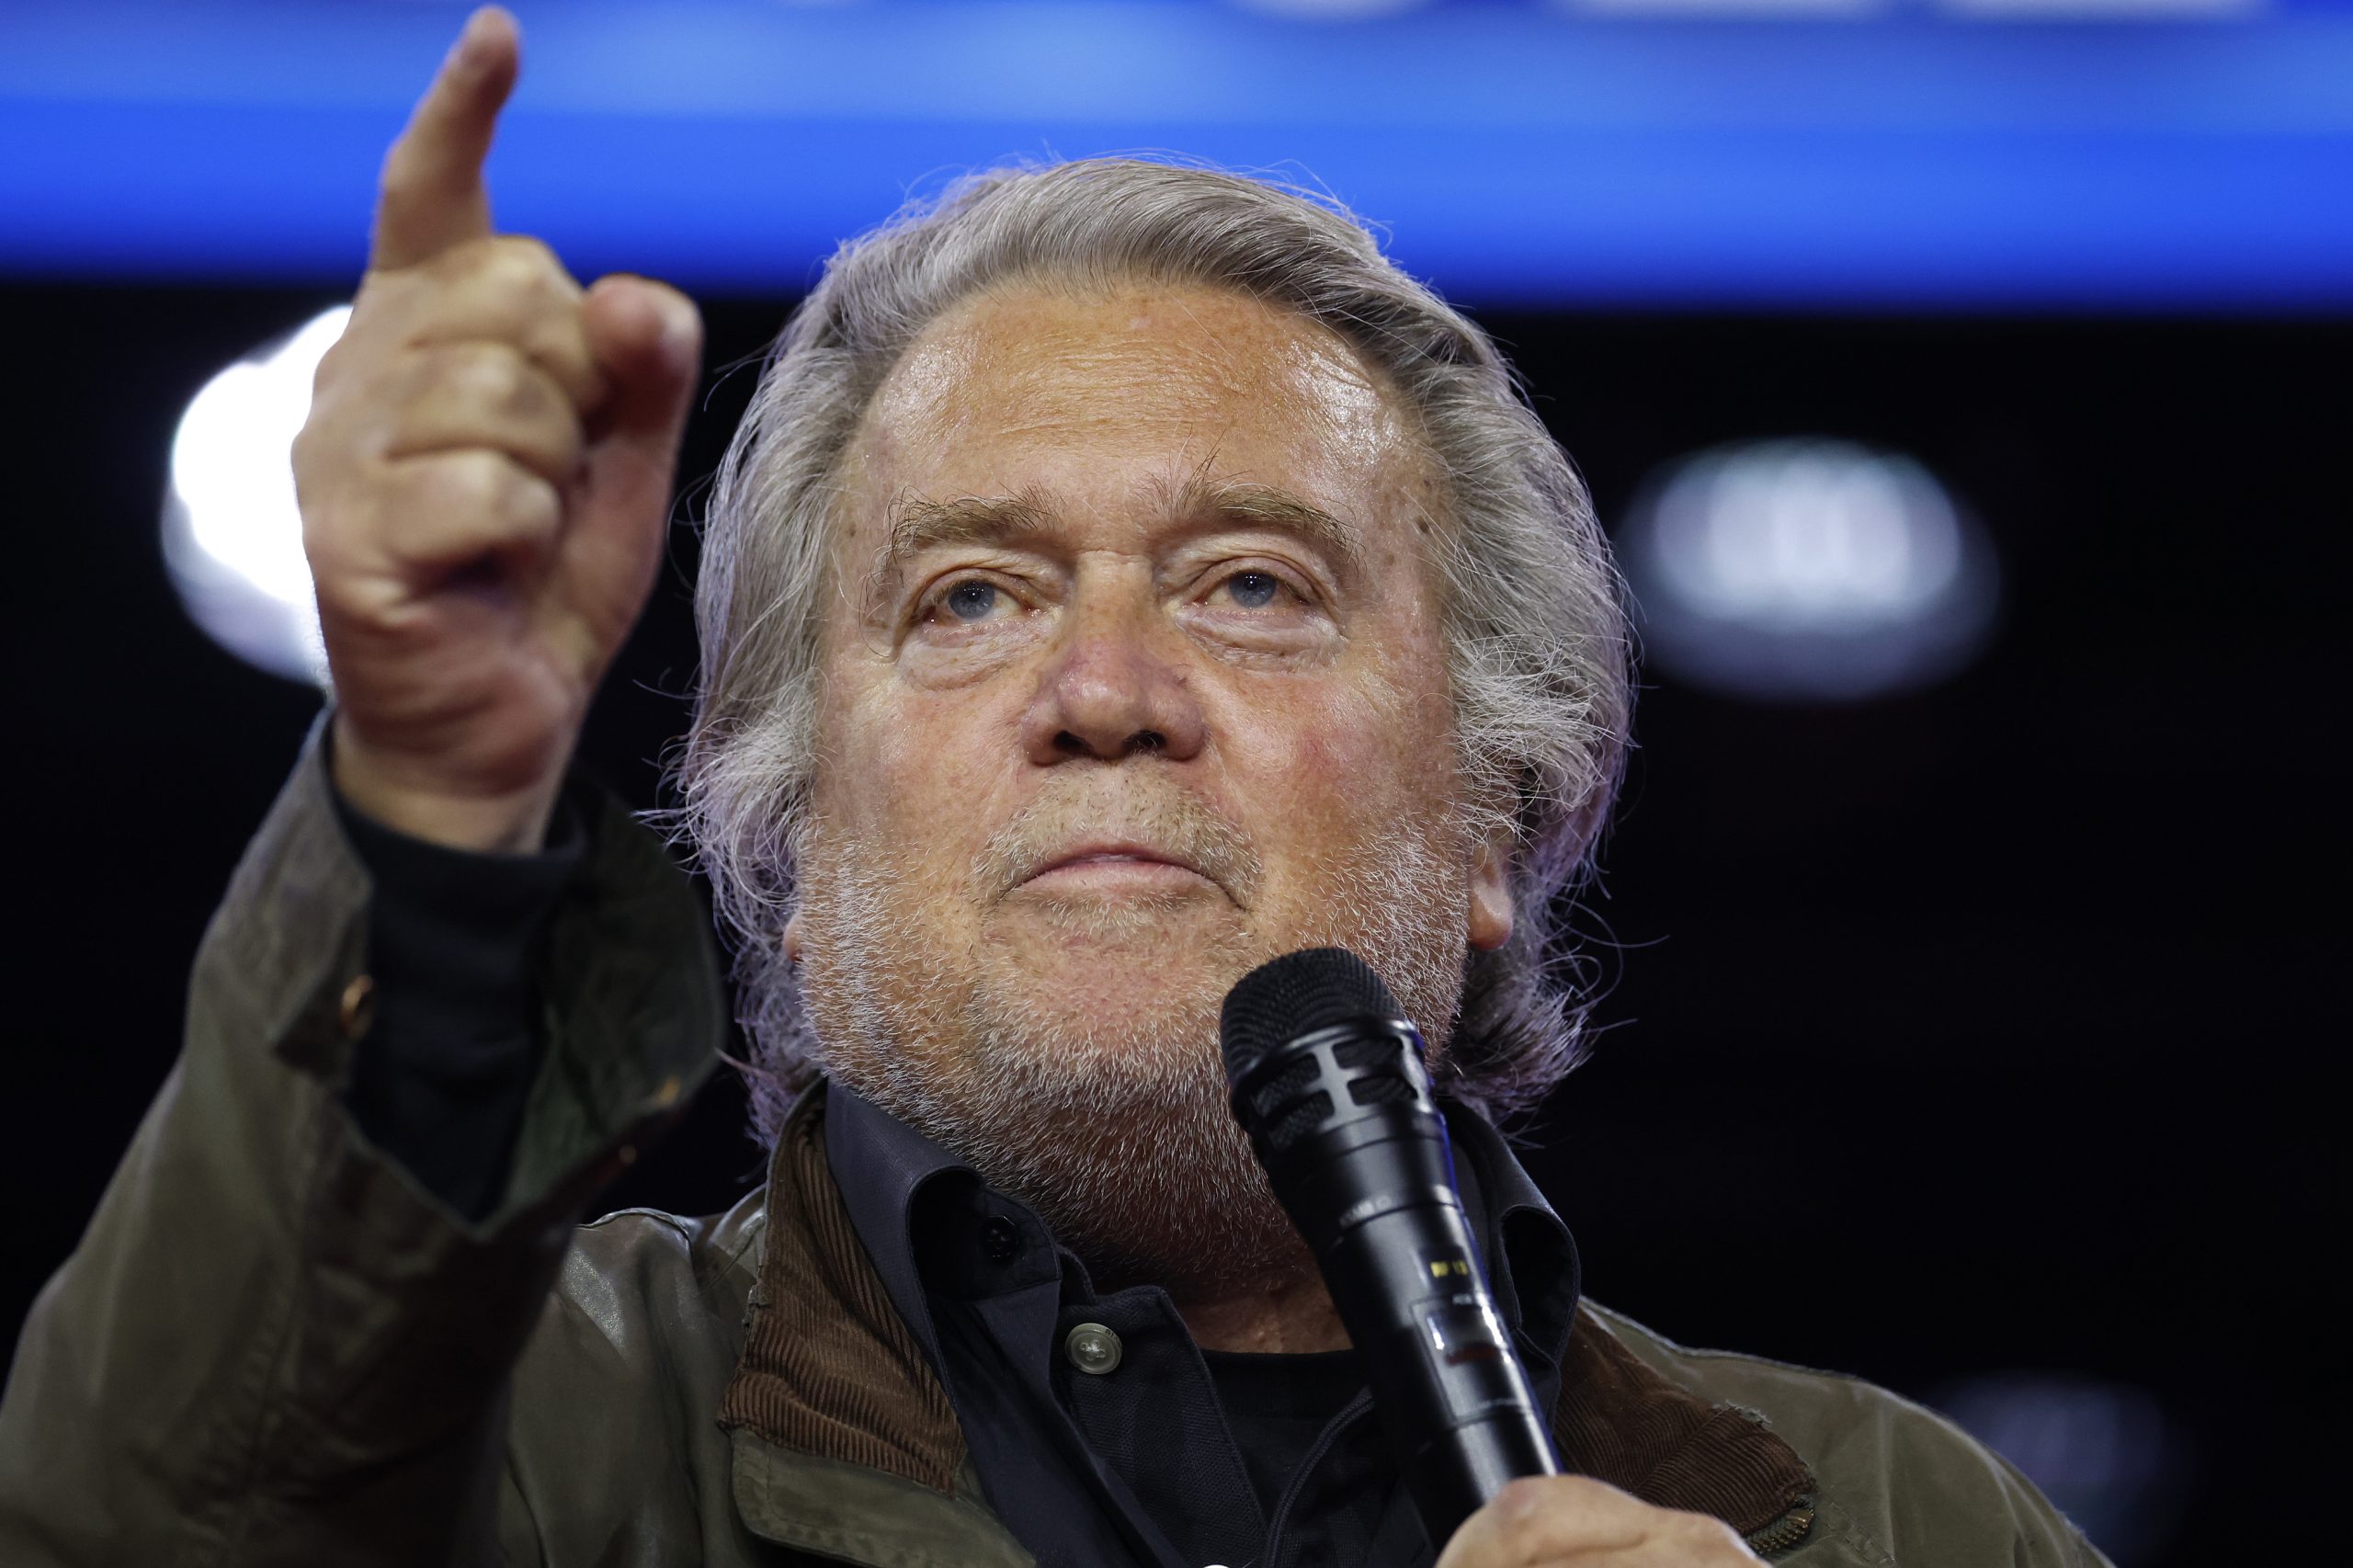 Steve Bannon Trashes ‘Meaningless’ Donald Trump Event